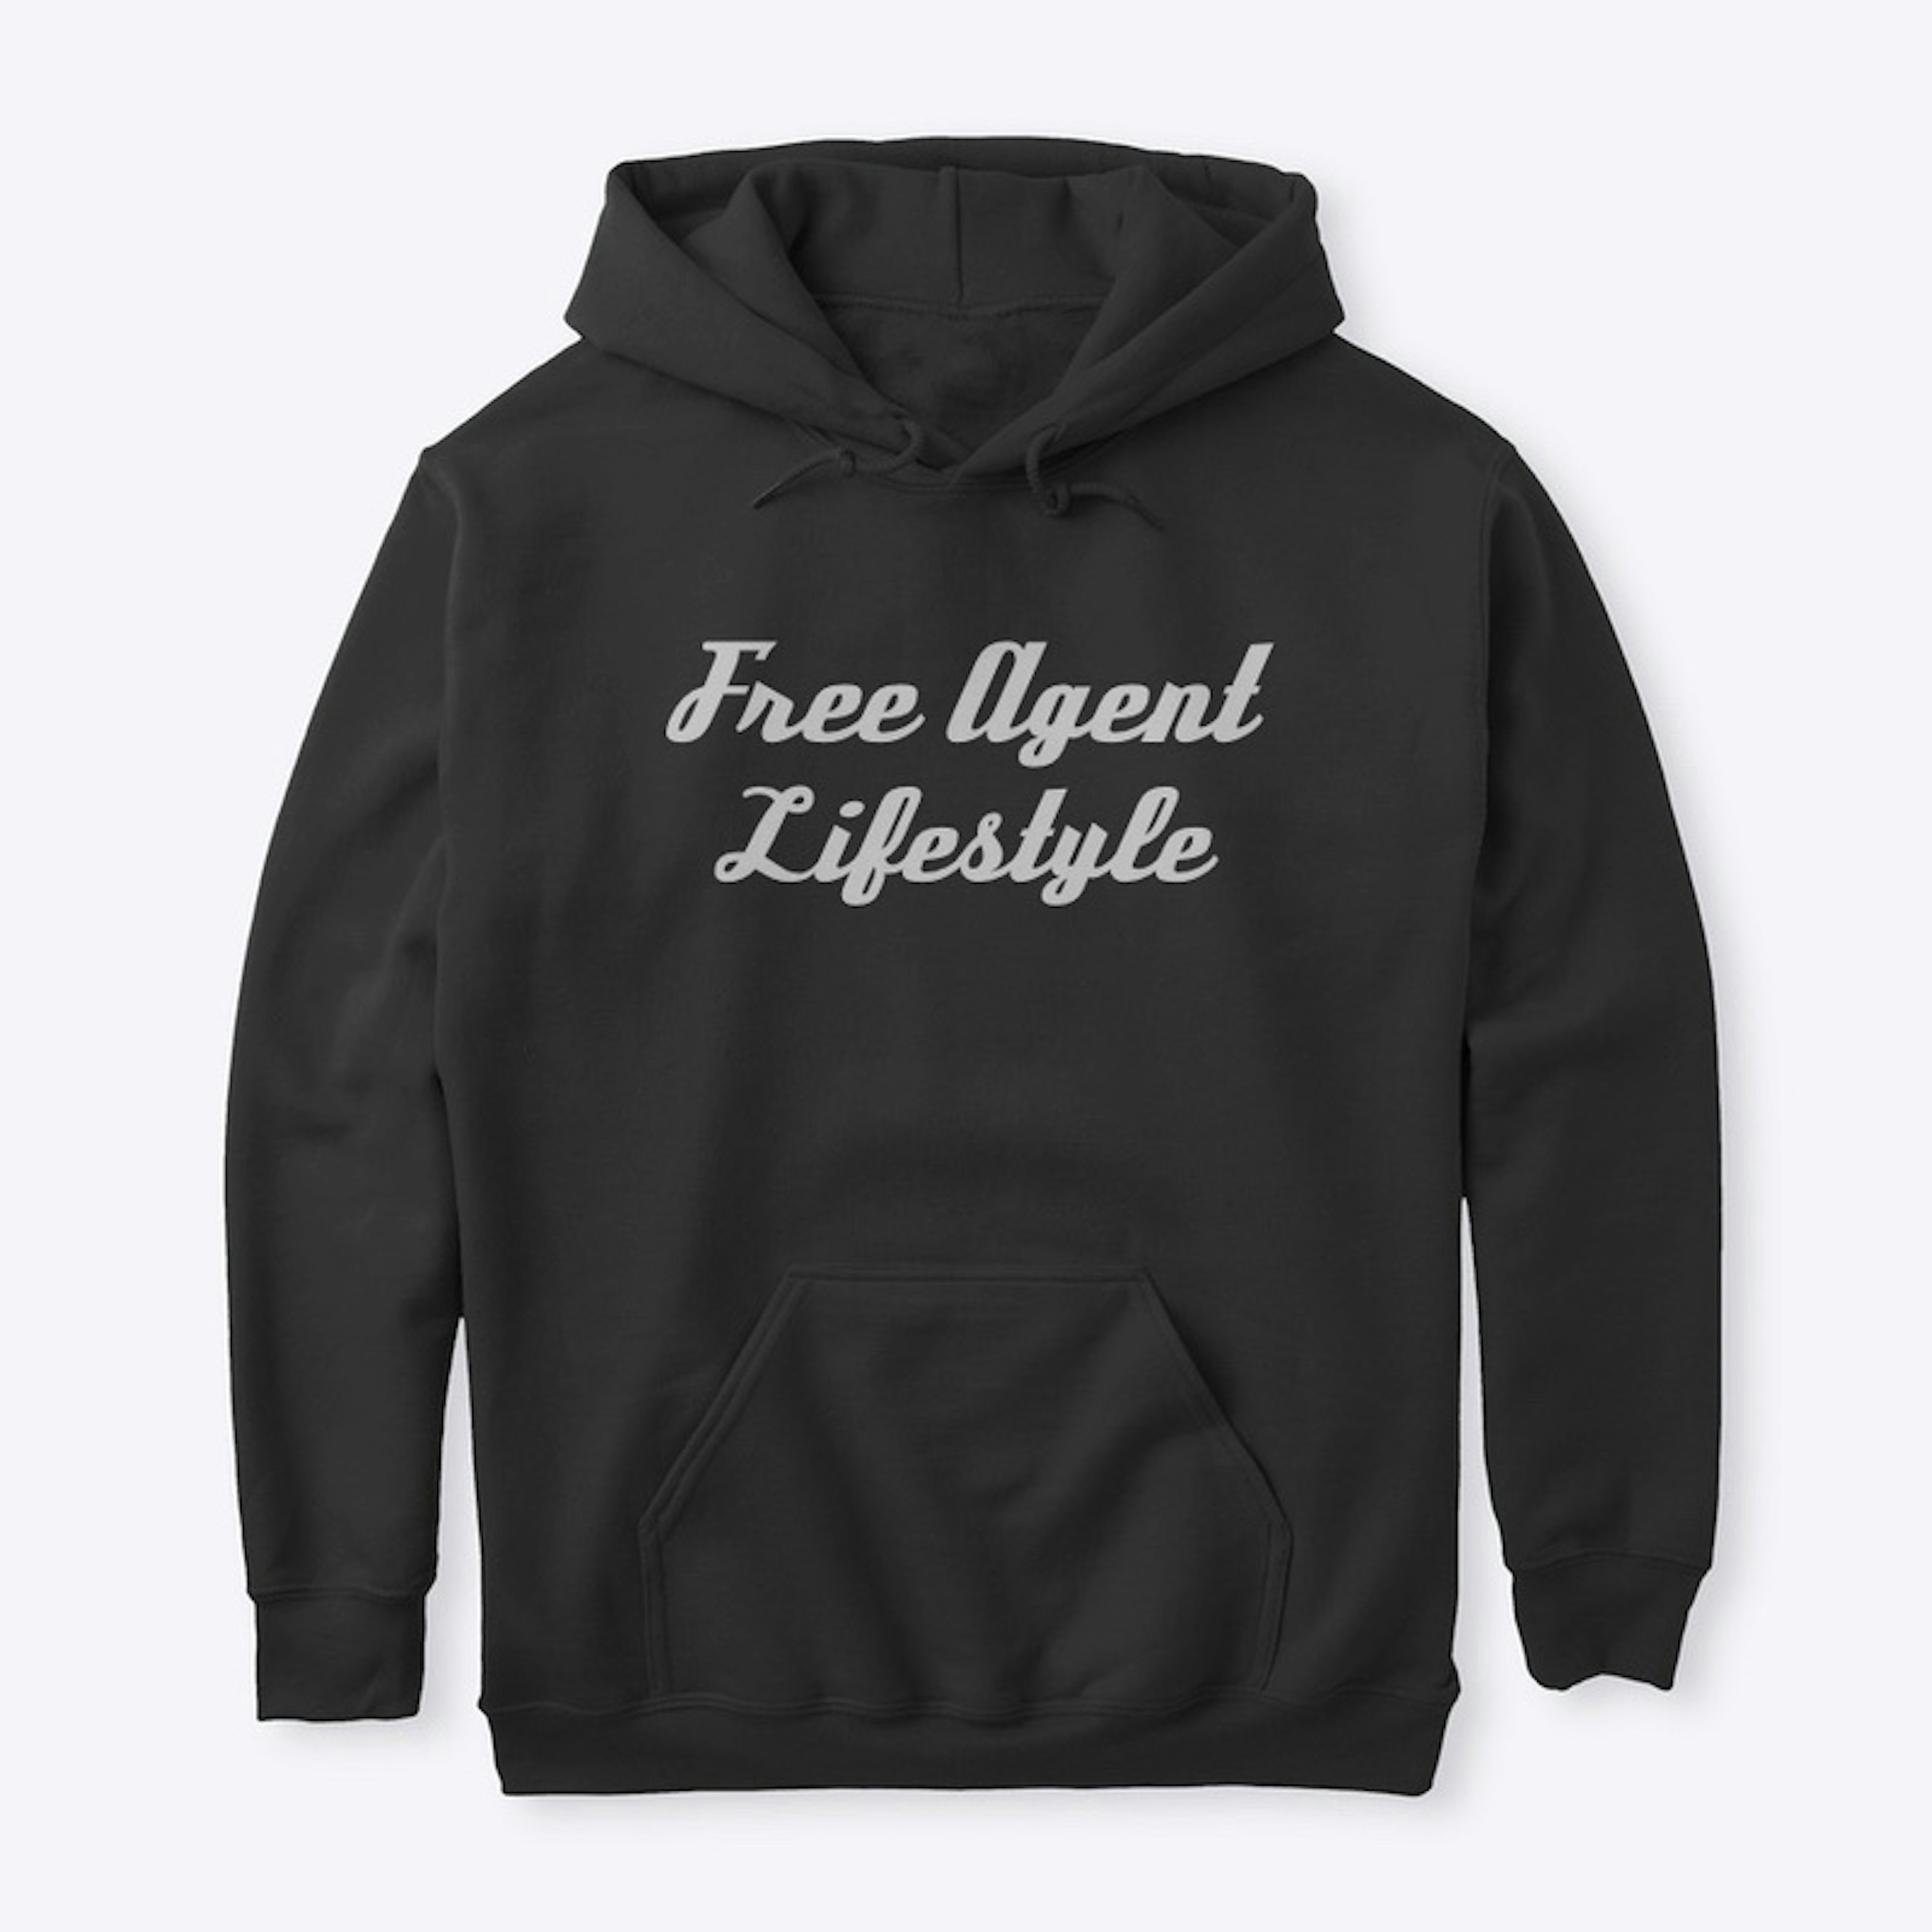 Free Agent Lifestyle Hoodie/T-shirt